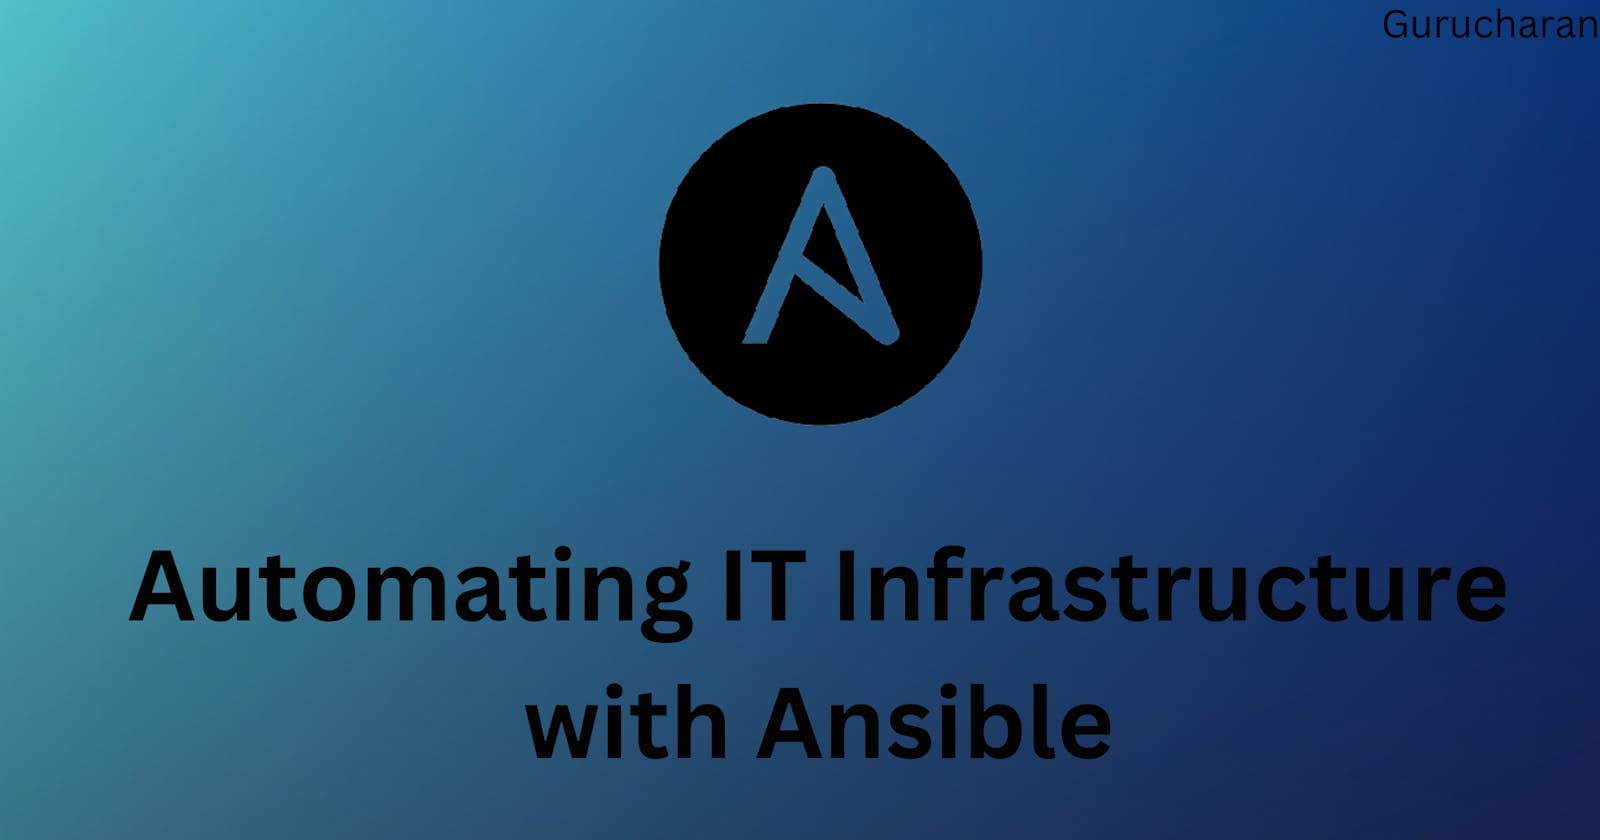 Automating IT Infrastructure with Ansible